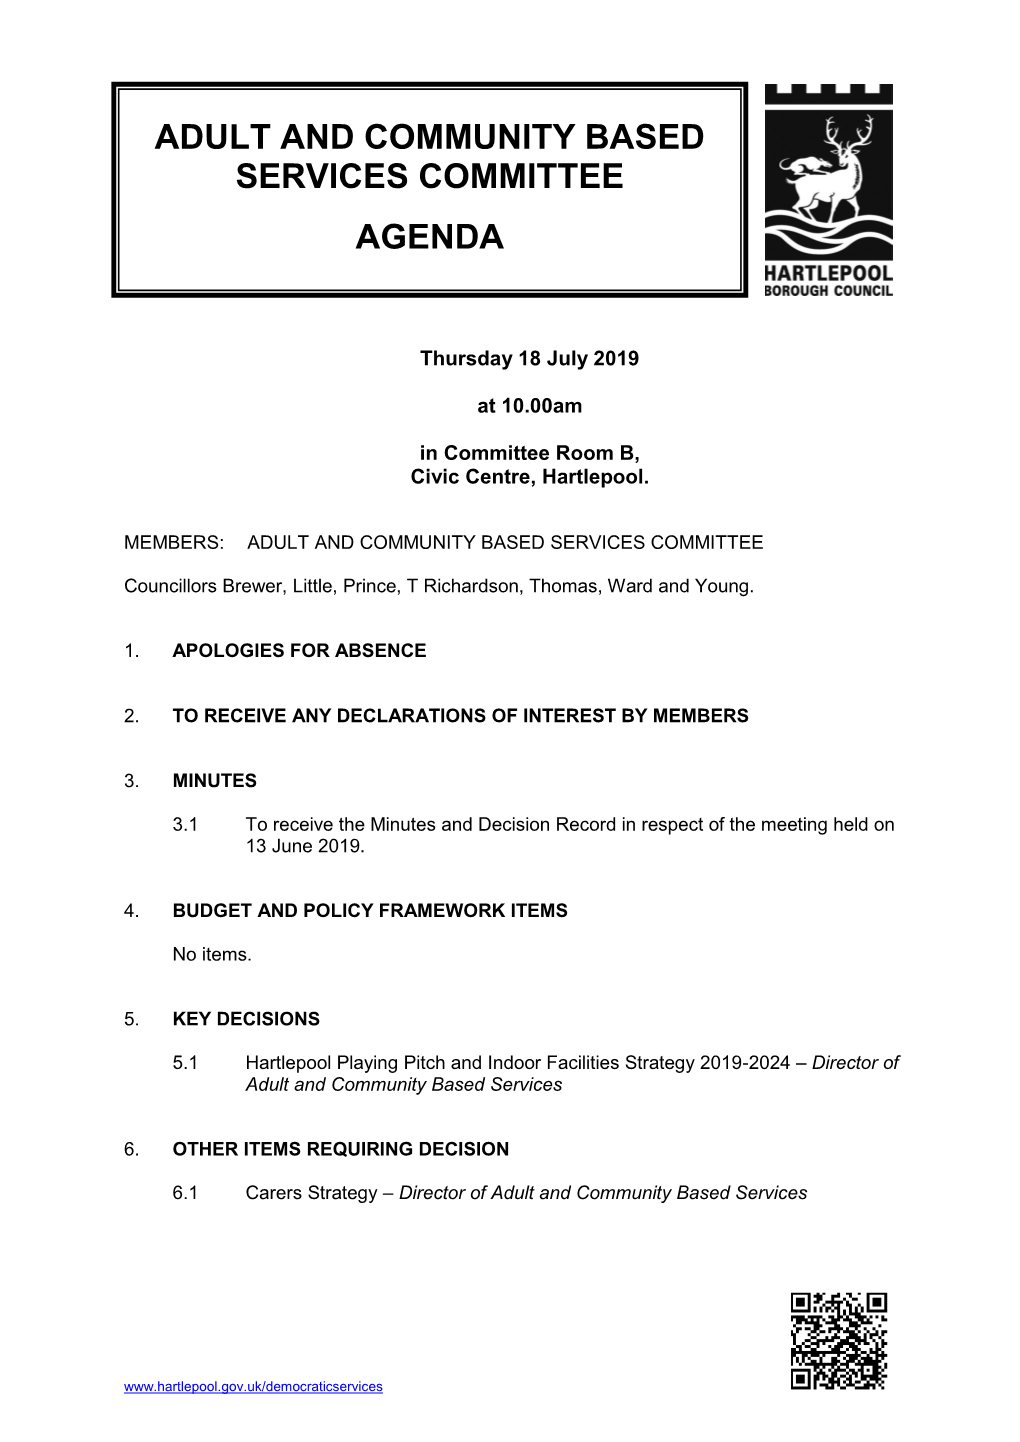 Adult and Community Based Services Committee Agenda